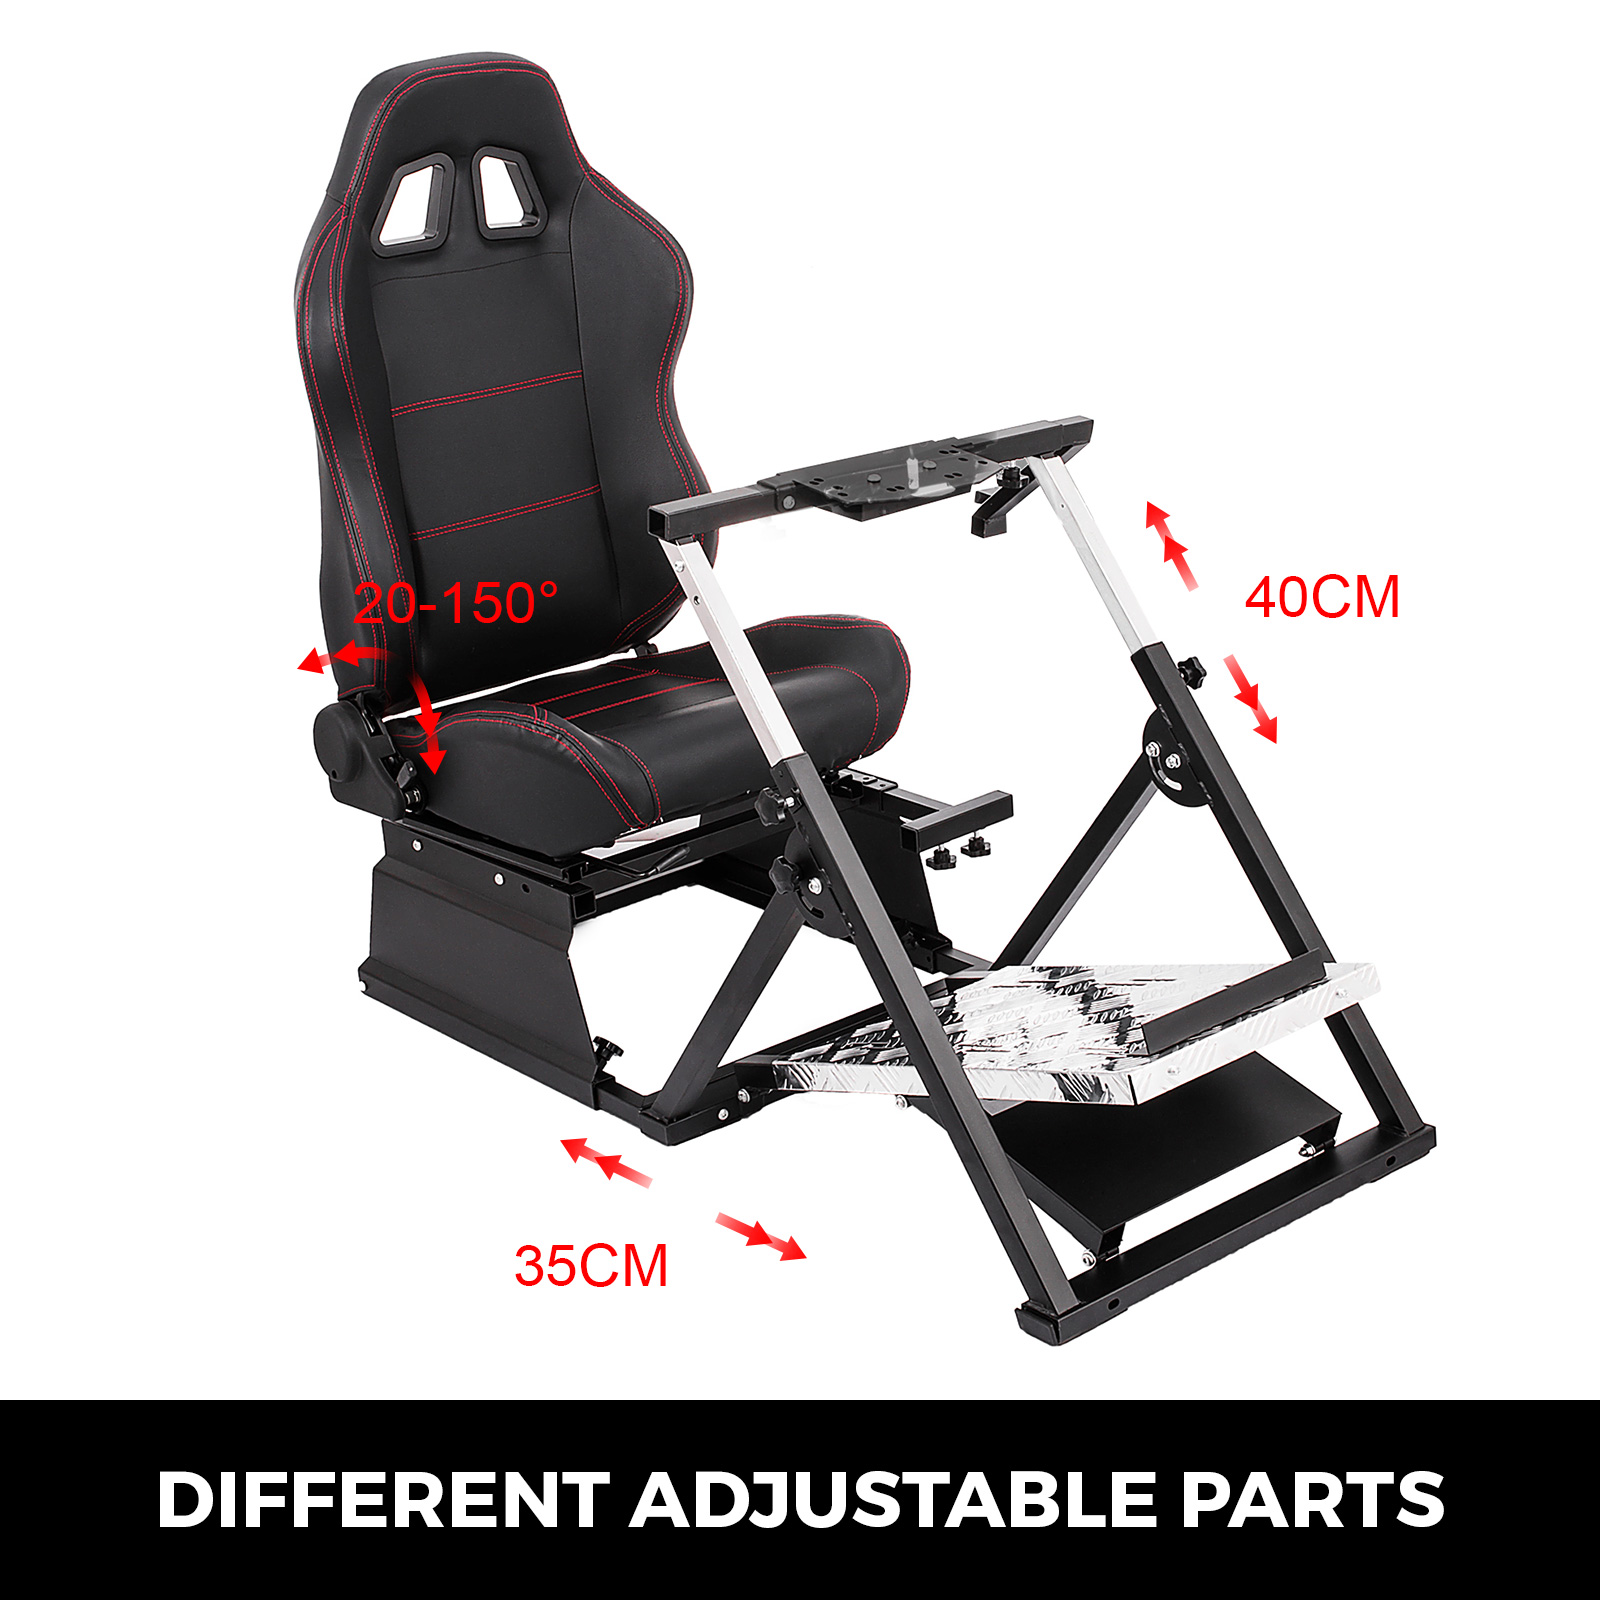 GY Black Adjustable Folding Racing Simulador Bucket Seat For Logitech G27 -  Buy GY Black Adjustable Folding Racing Simulador Bucket Seat For Logitech  G27 Product on